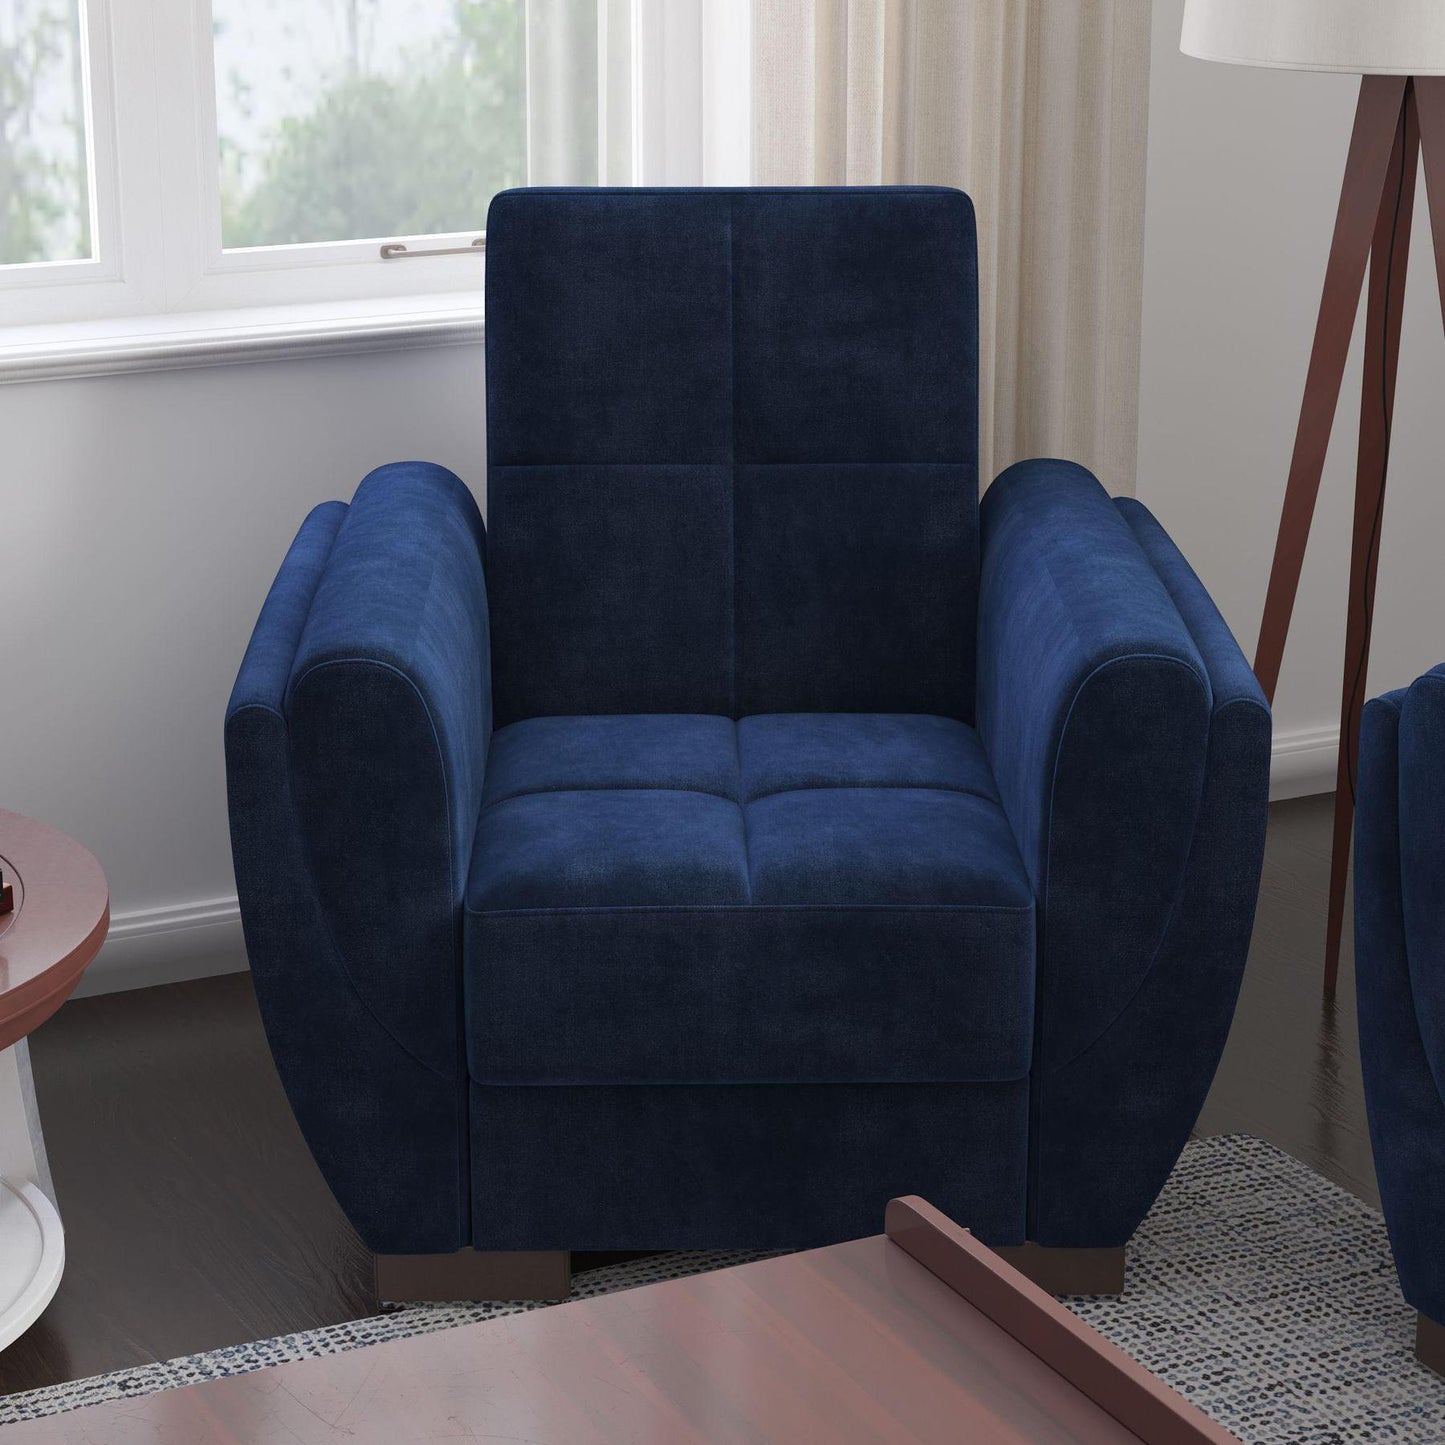 Modern design, True Blue , Microfiber upholstered convertible Armchair with underseat storage from Voyage Shelter by Ottomanson in living room lifestyle setting by itself. This Armchair measures 42 inches width by 36 inches depth by 41 inches height.